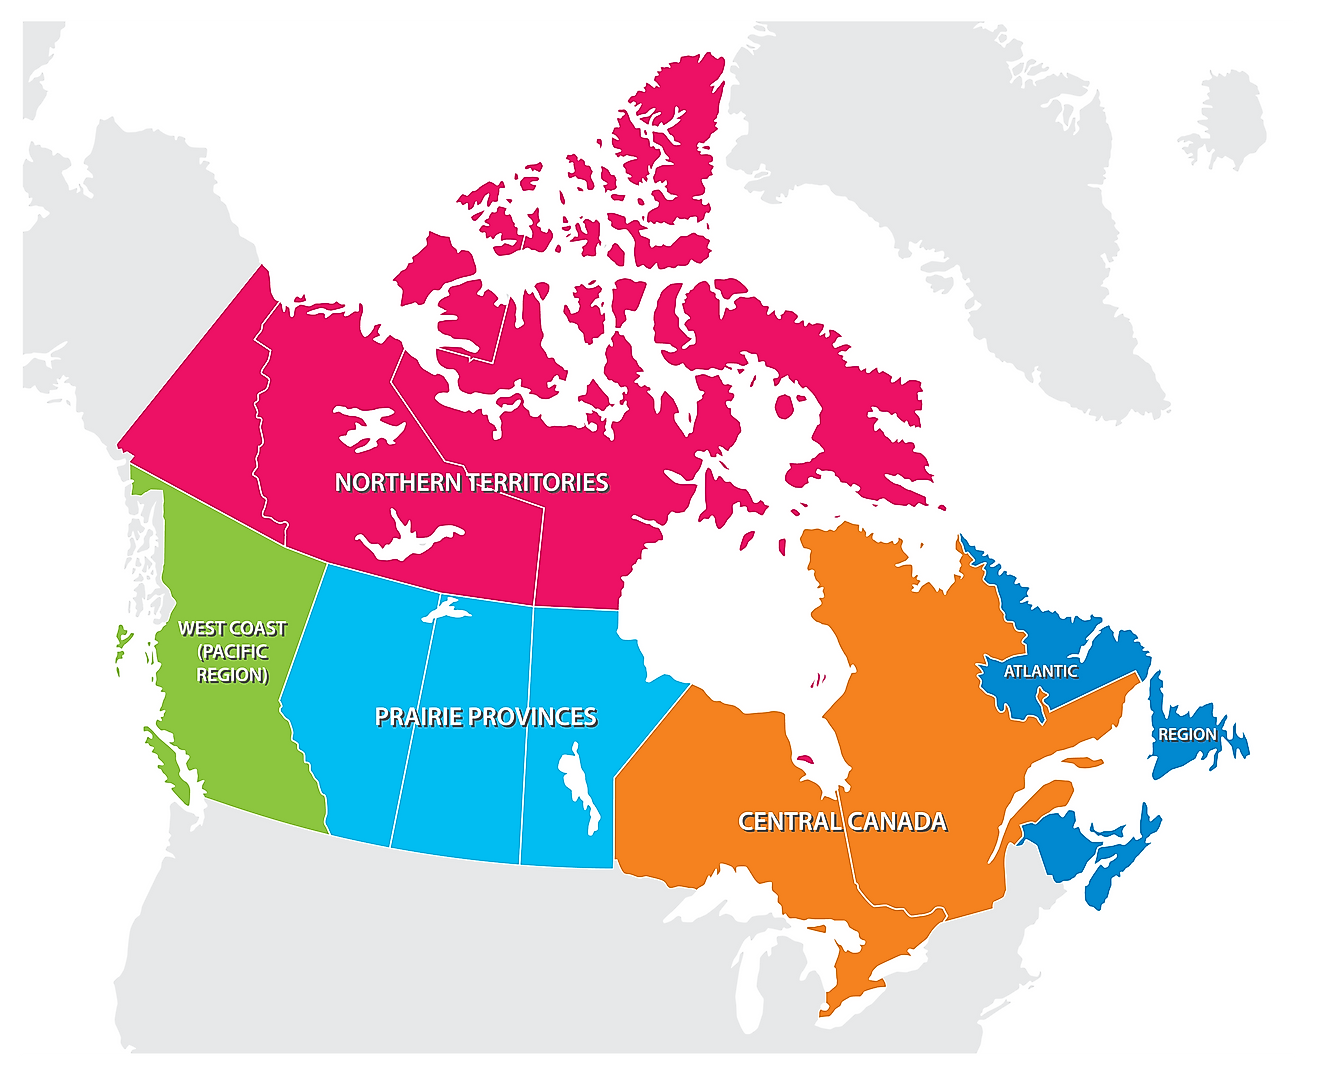 Map showing the 5 regions of Canada. Image credit: Rainer Lesniewski/shutterstock.com